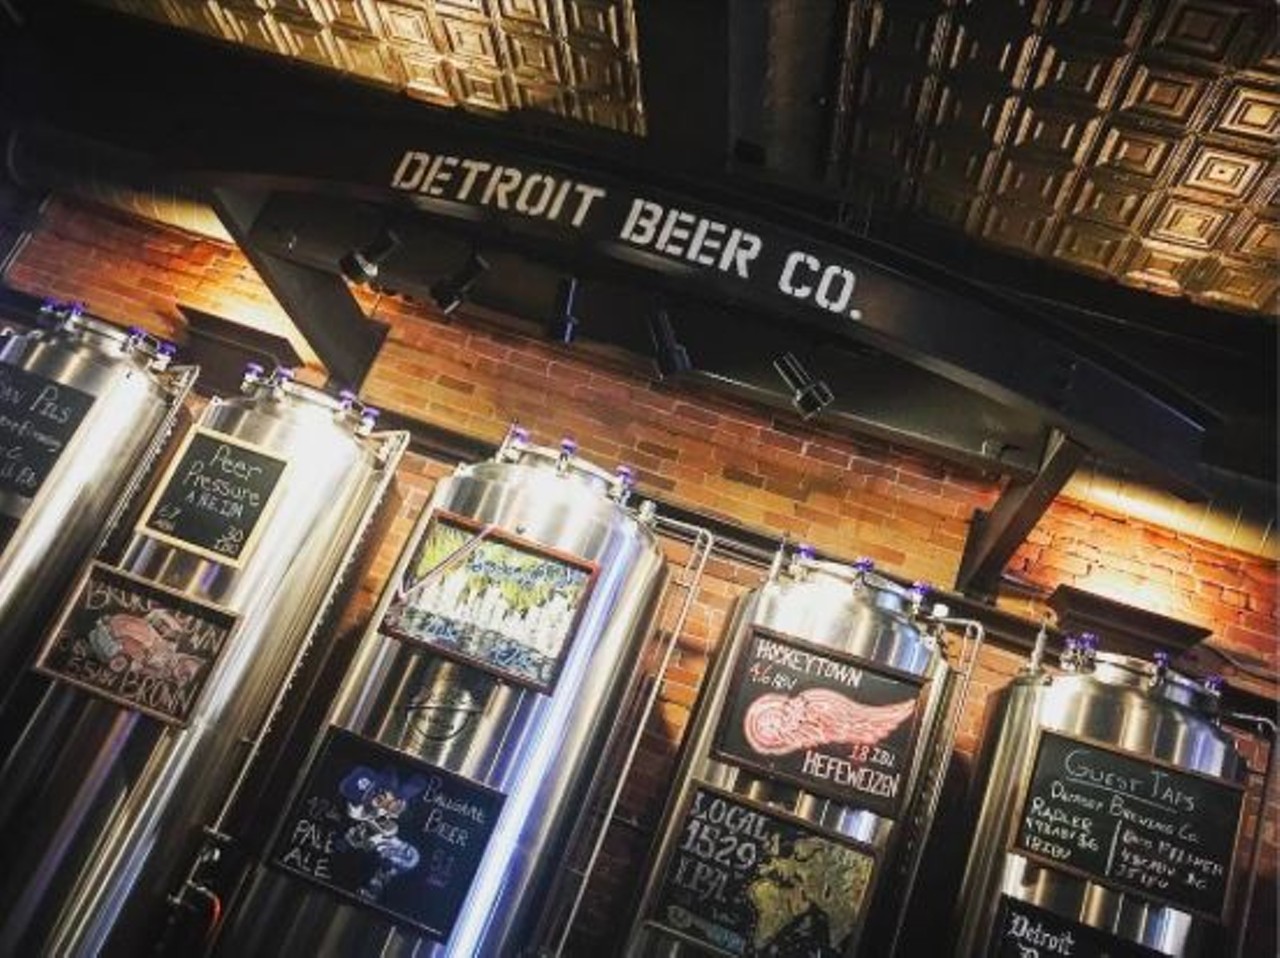 Detroit Beer Co.
1529 Broadway St., Detroit
This brewery rotates their fresh brews daily, offering customers 7-9 different beers every day. It&#146;s location in the middle of downtown makes for a great bike ride and relaxing spot to look at the city. Photo via @msassifrass&nbsp;